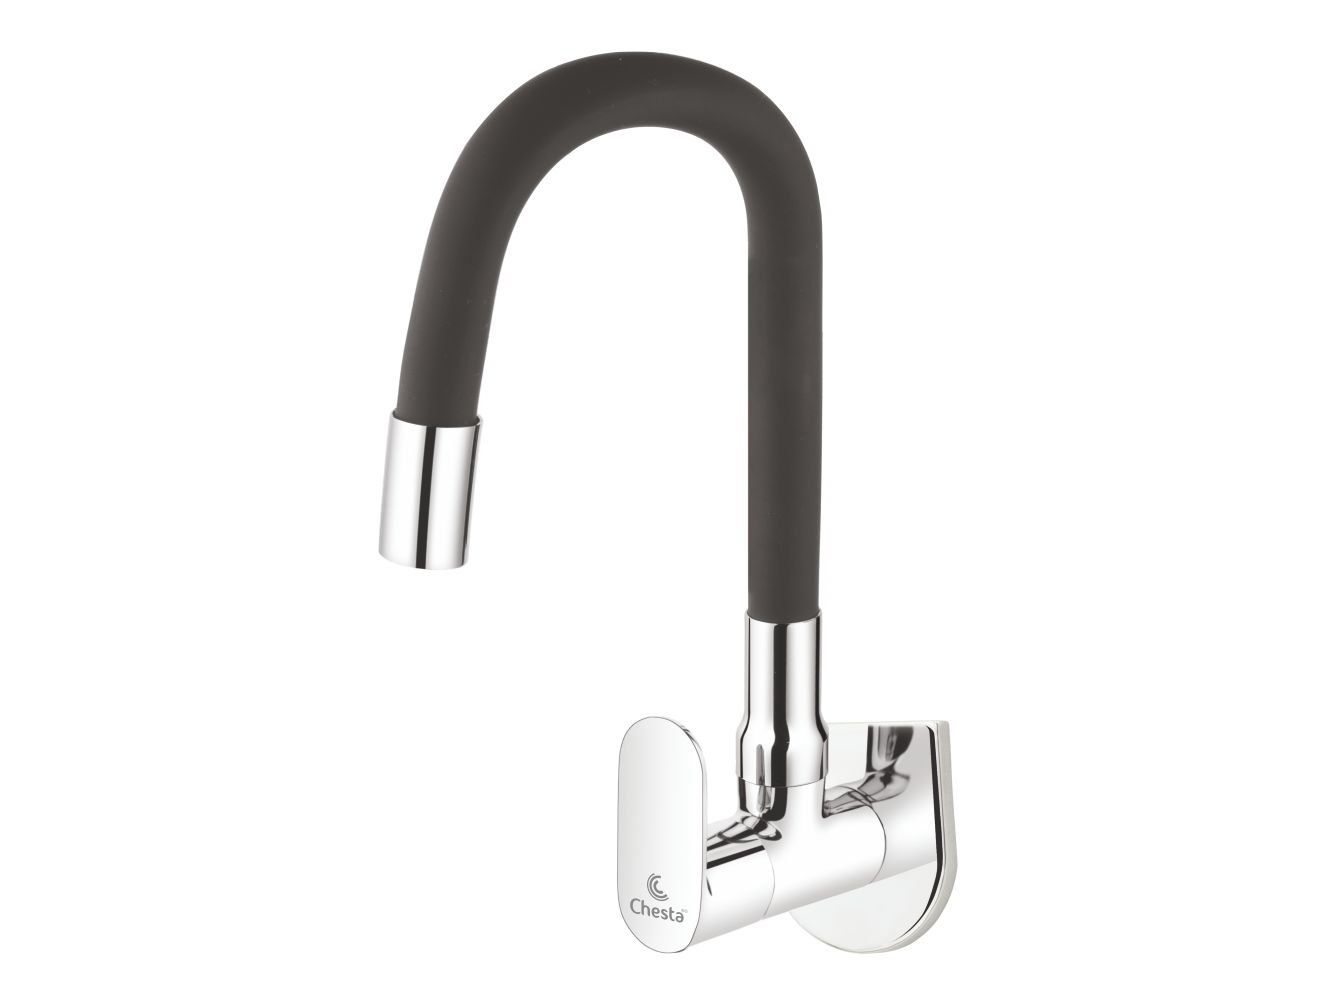 IC - 1009/1010 - Flexible Sink Cock with Wall Flange at Chesta